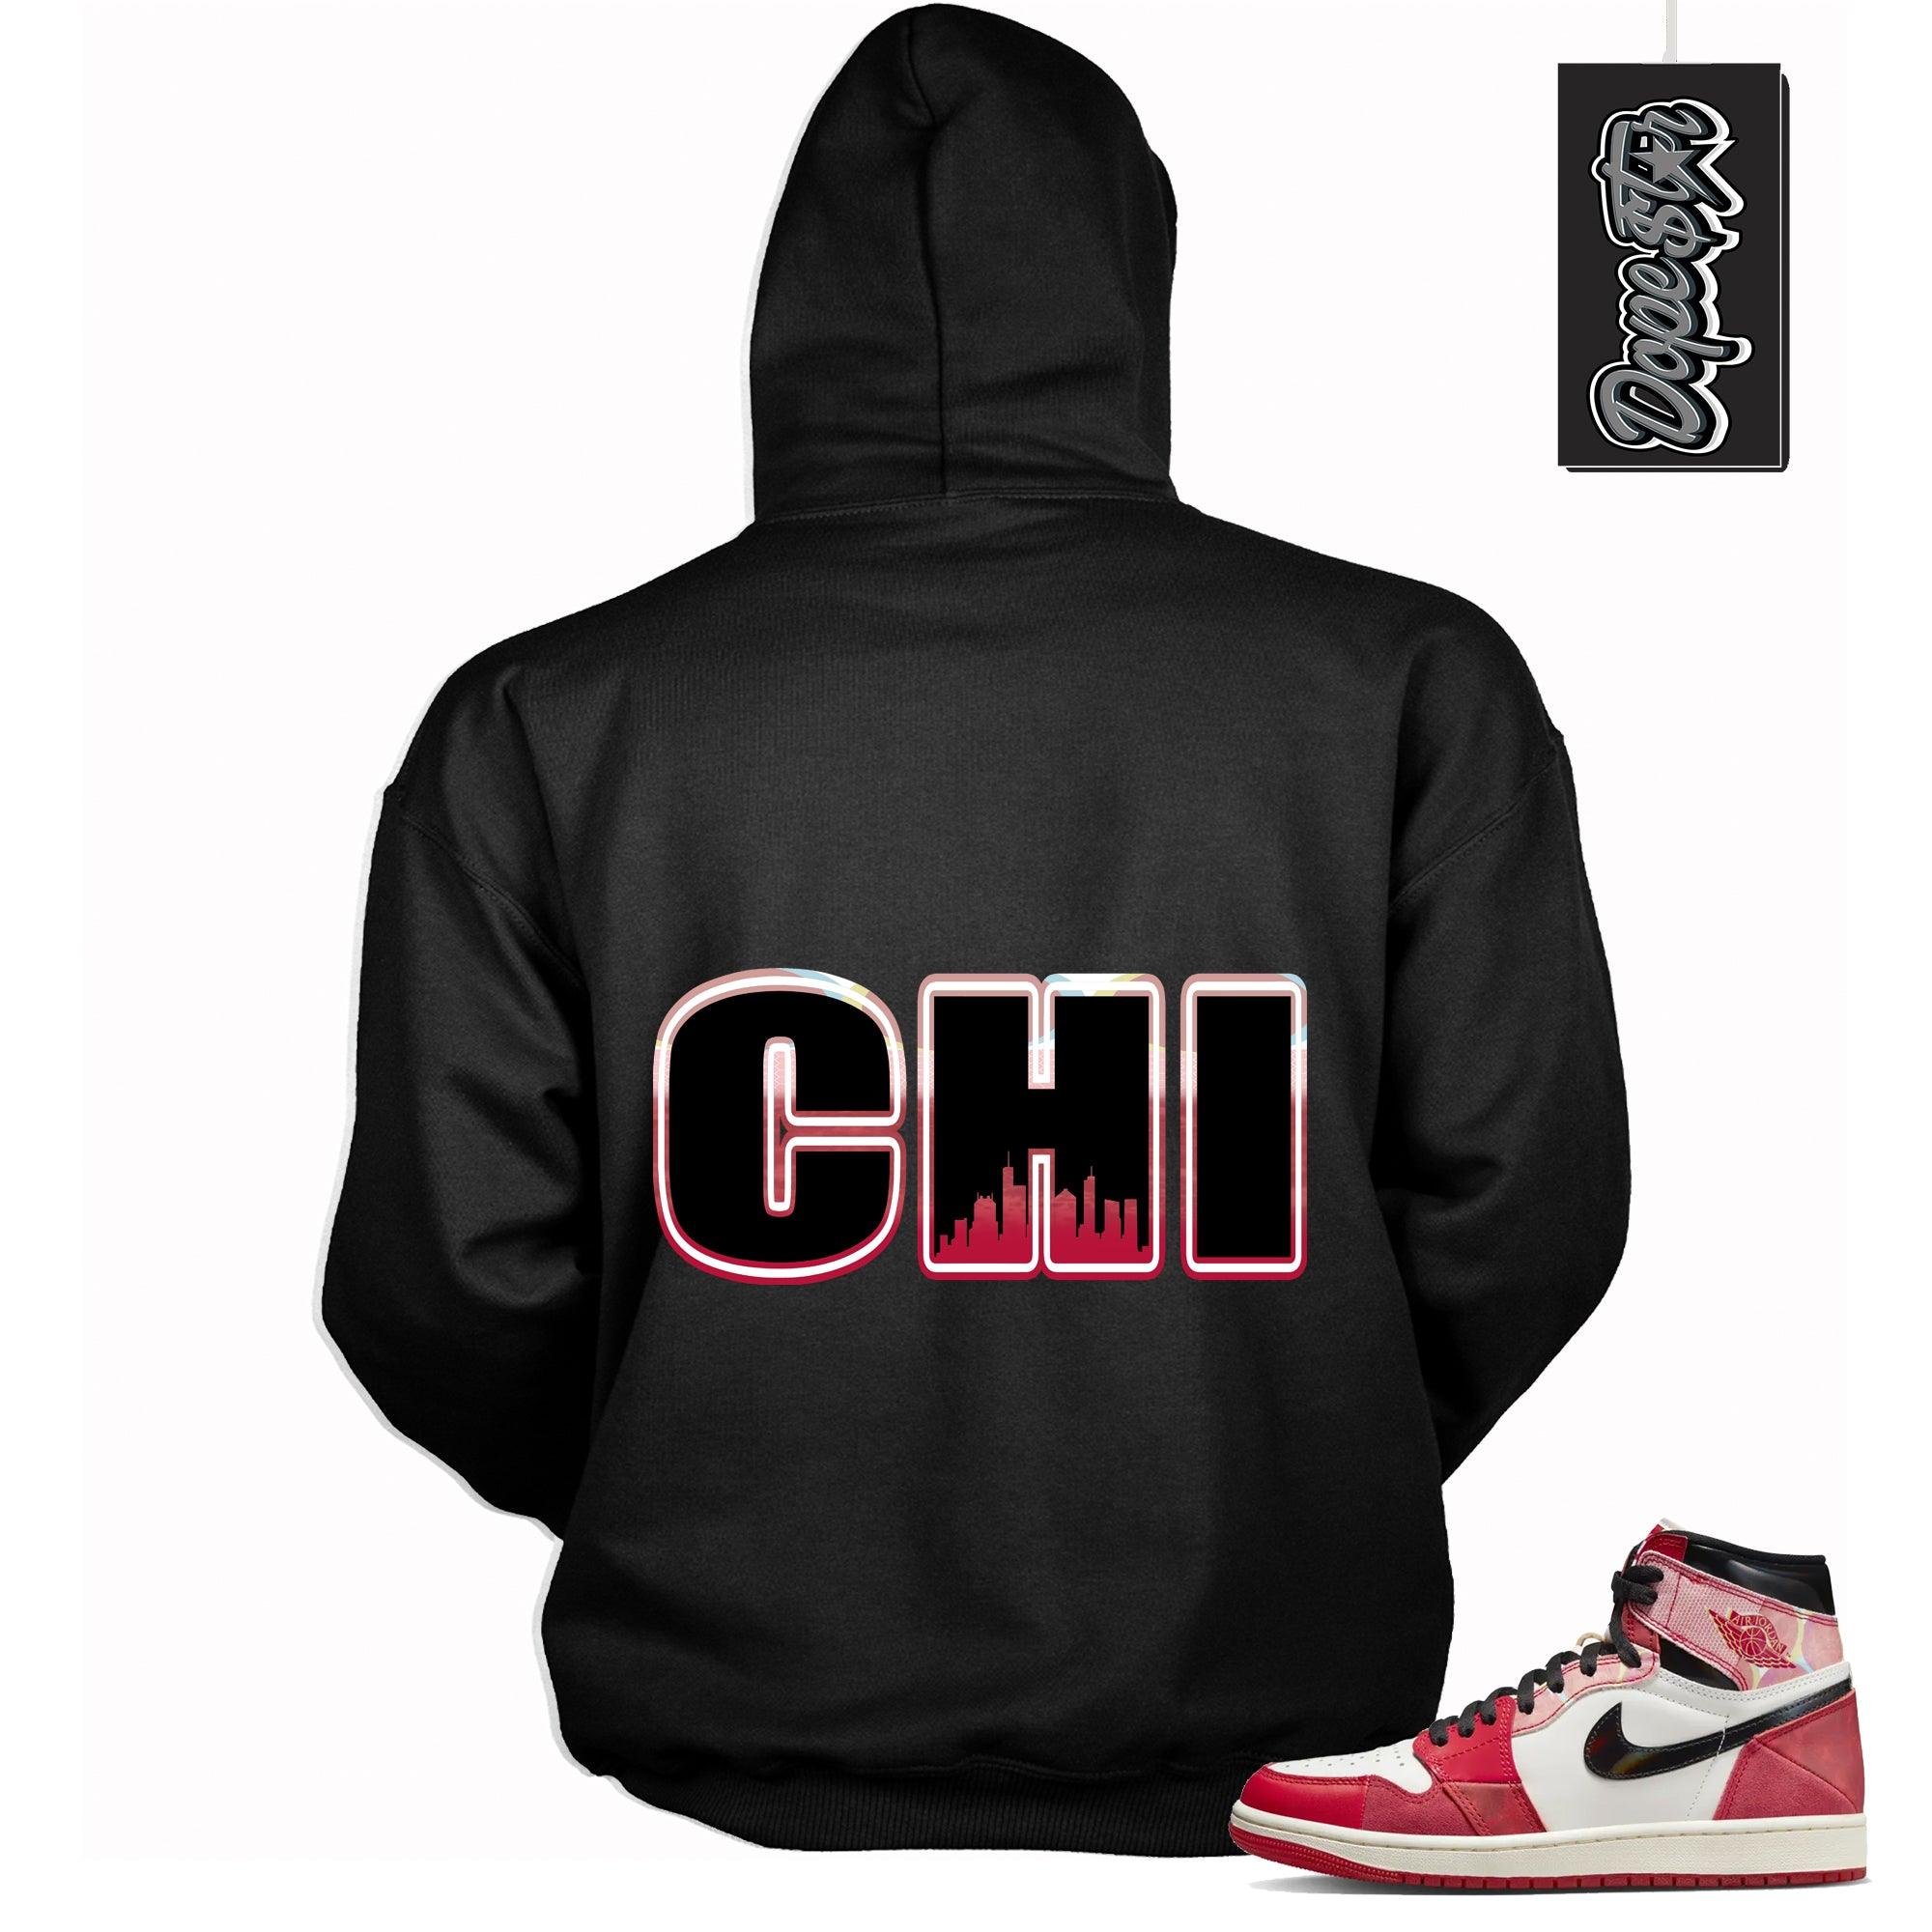 Cool Black Graphic Hoodie with “ Chicago “ print, that perfectly matches AIR JORDAN 1 Retro High OG NEXT CHAPTER SPIDER-VERSE sneakers